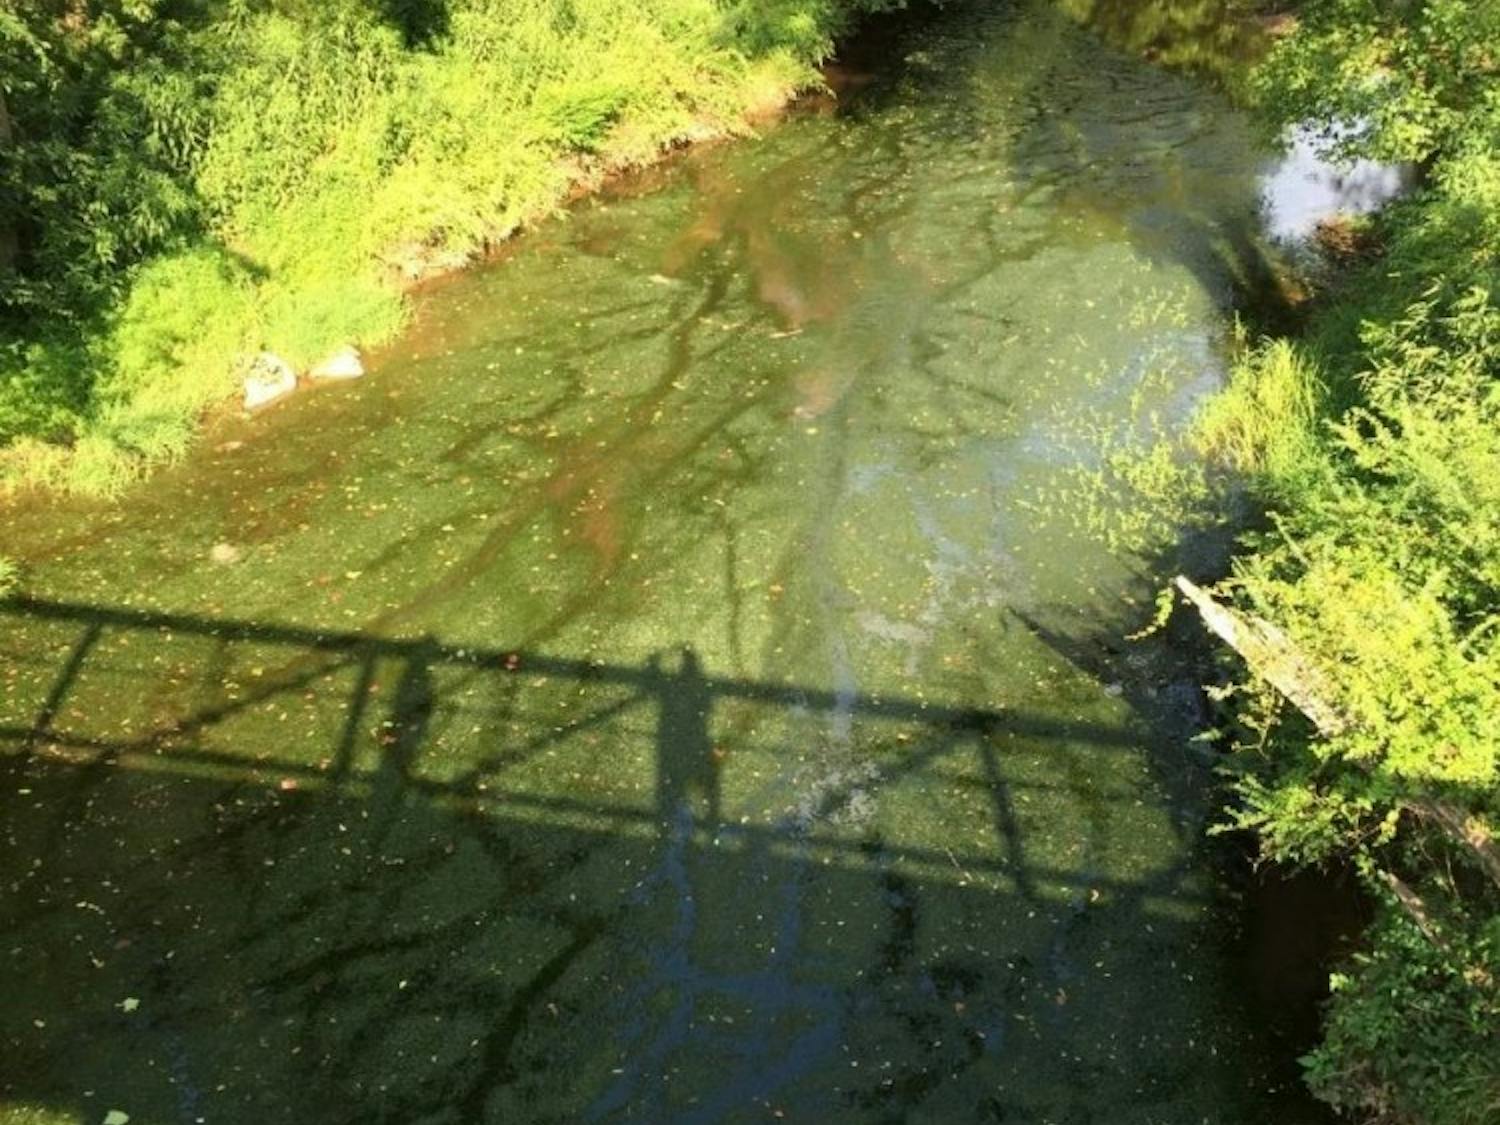 Above is a picture of the Riverwalk Greenway bridge near Weaver Street Market in Hillsborough showing the hydrilla infestation from May 2018. Treatment usually runs from mid-May to mid-August. Photo courtesy of Mark Heilman.